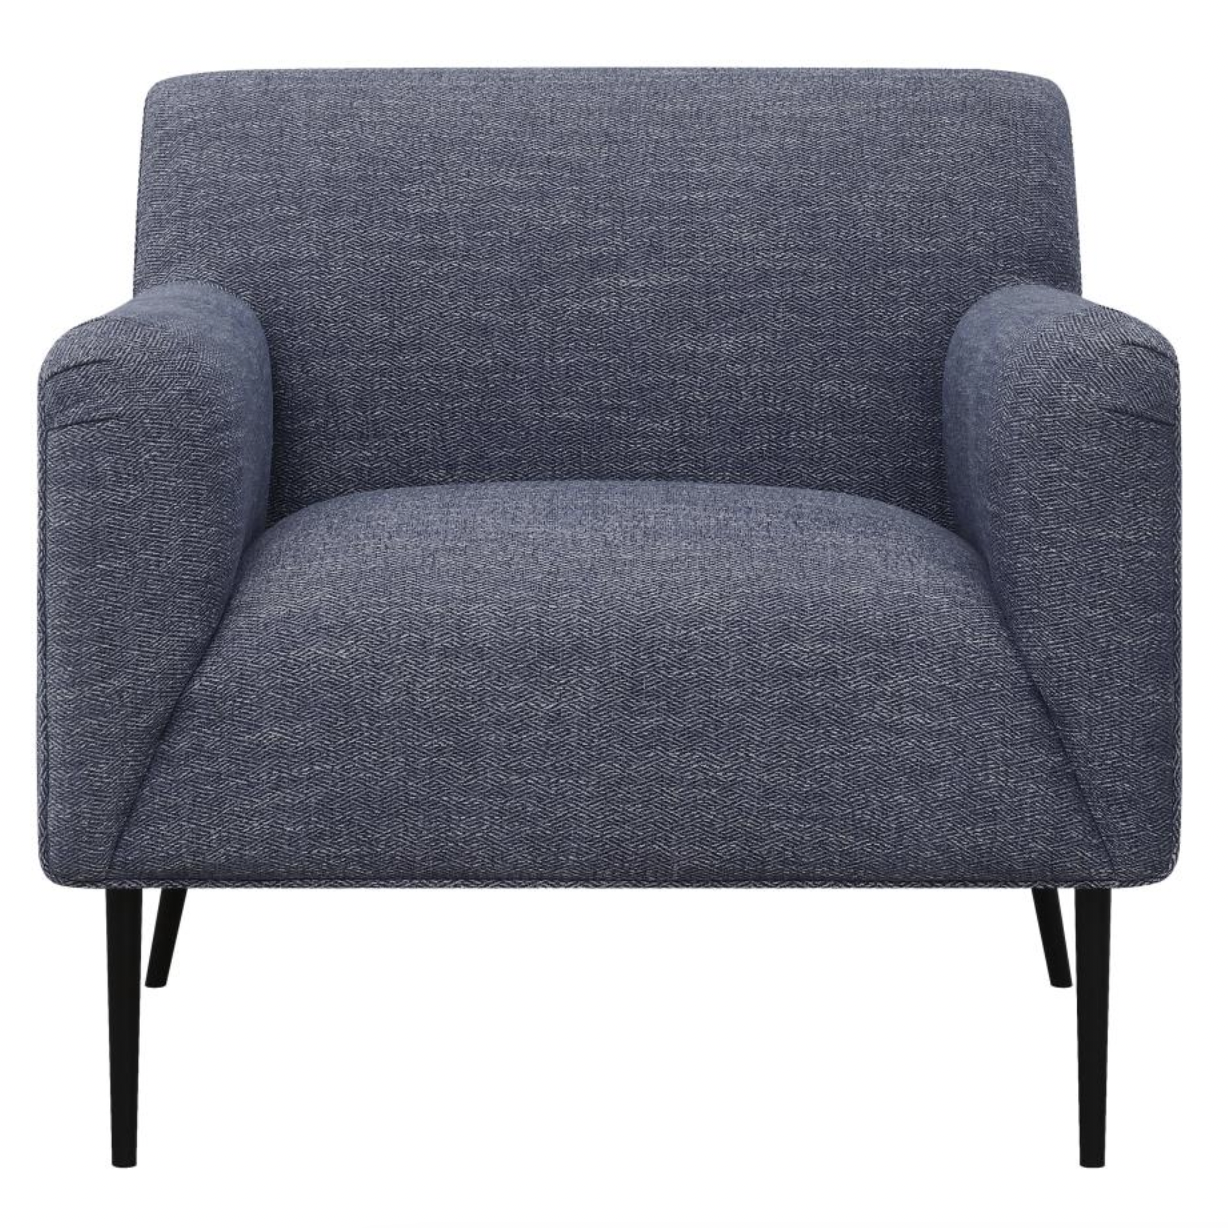 DARLENE Upholstered Track Arms Accent Chair Navy Blue